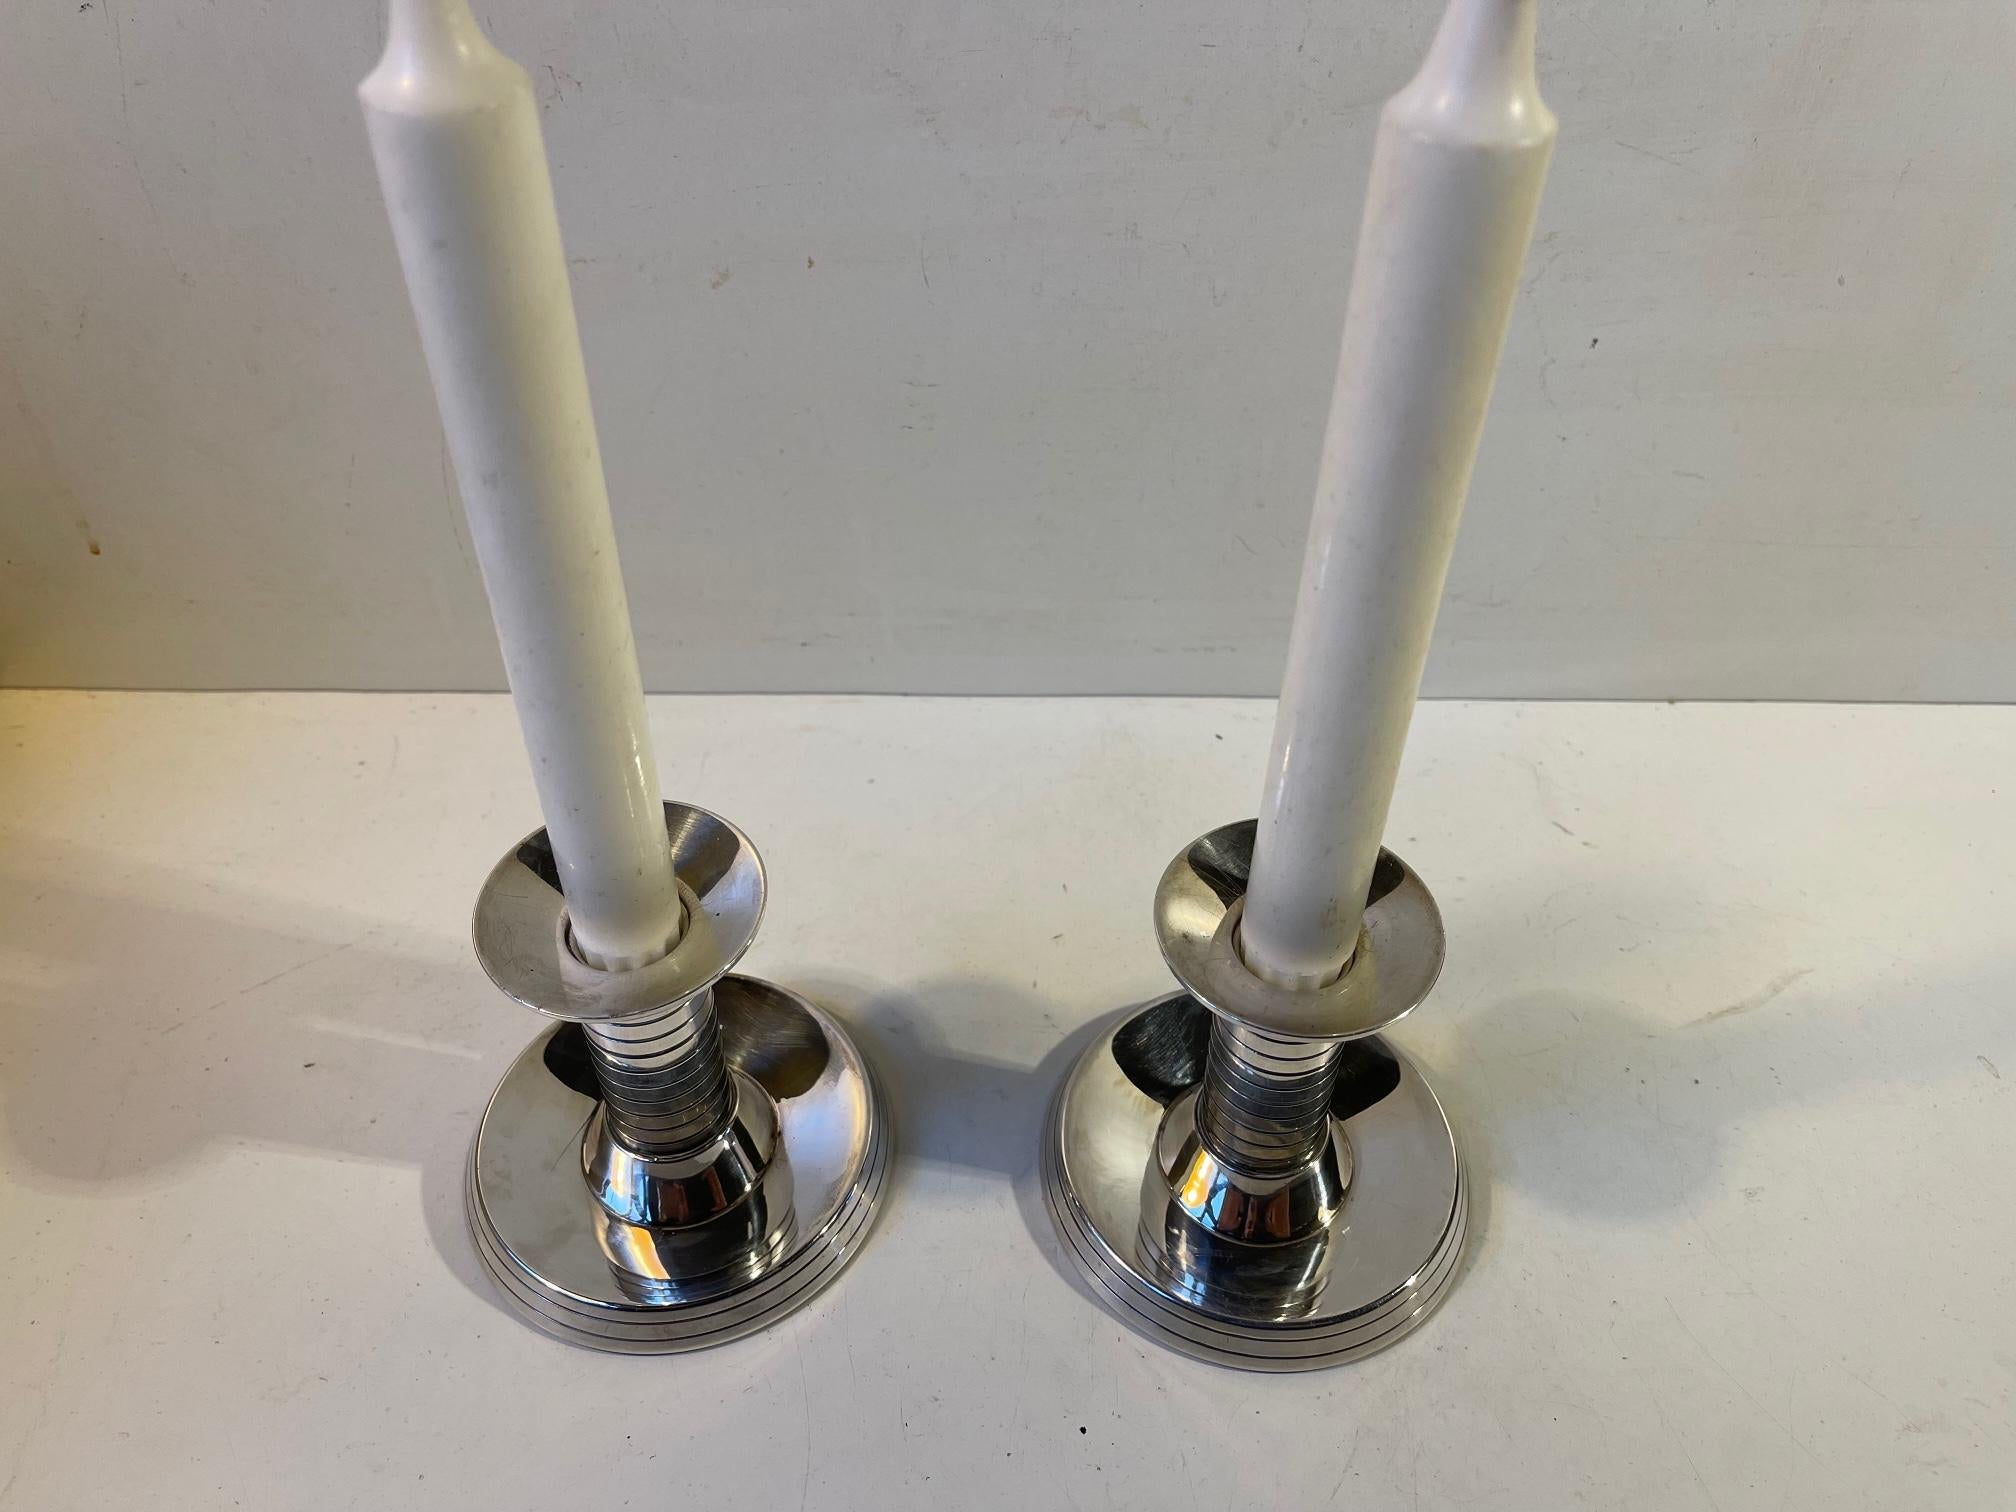 Early 20th Century Art Deco Candlesticks in Plated Silver from Carl F. Christensen, 1920s For Sale